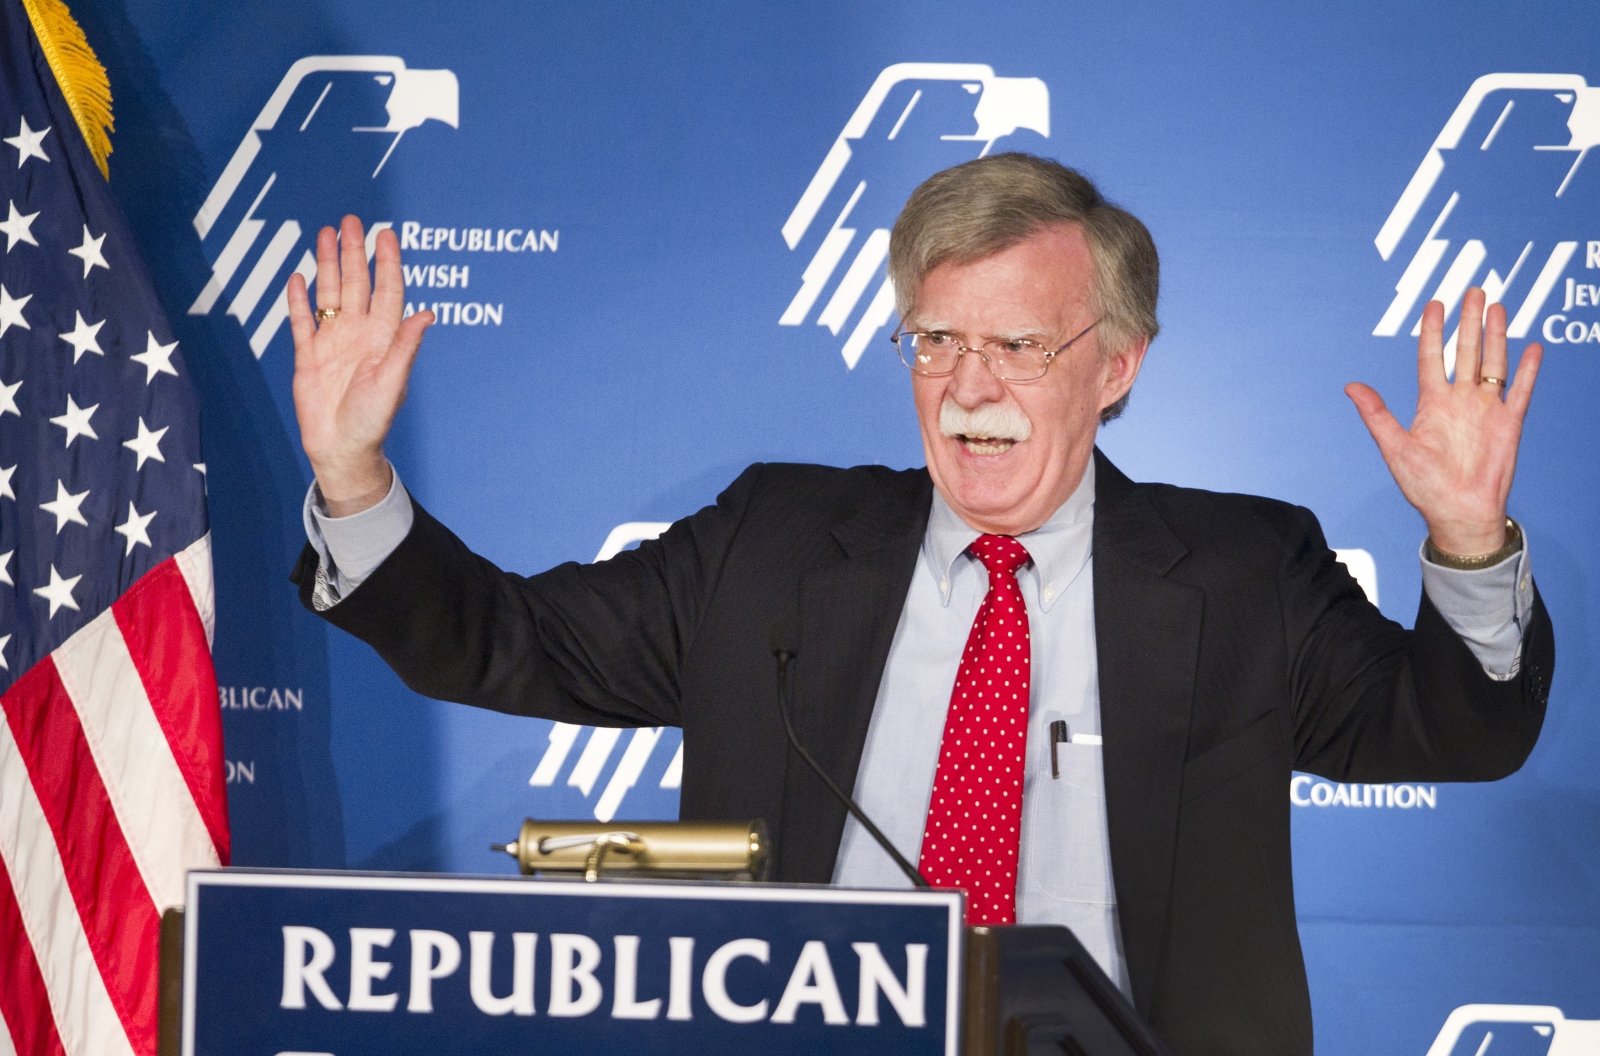 US election 2016: Former US Ambassador to the UN John Bolton to announce decision1600 x 1056